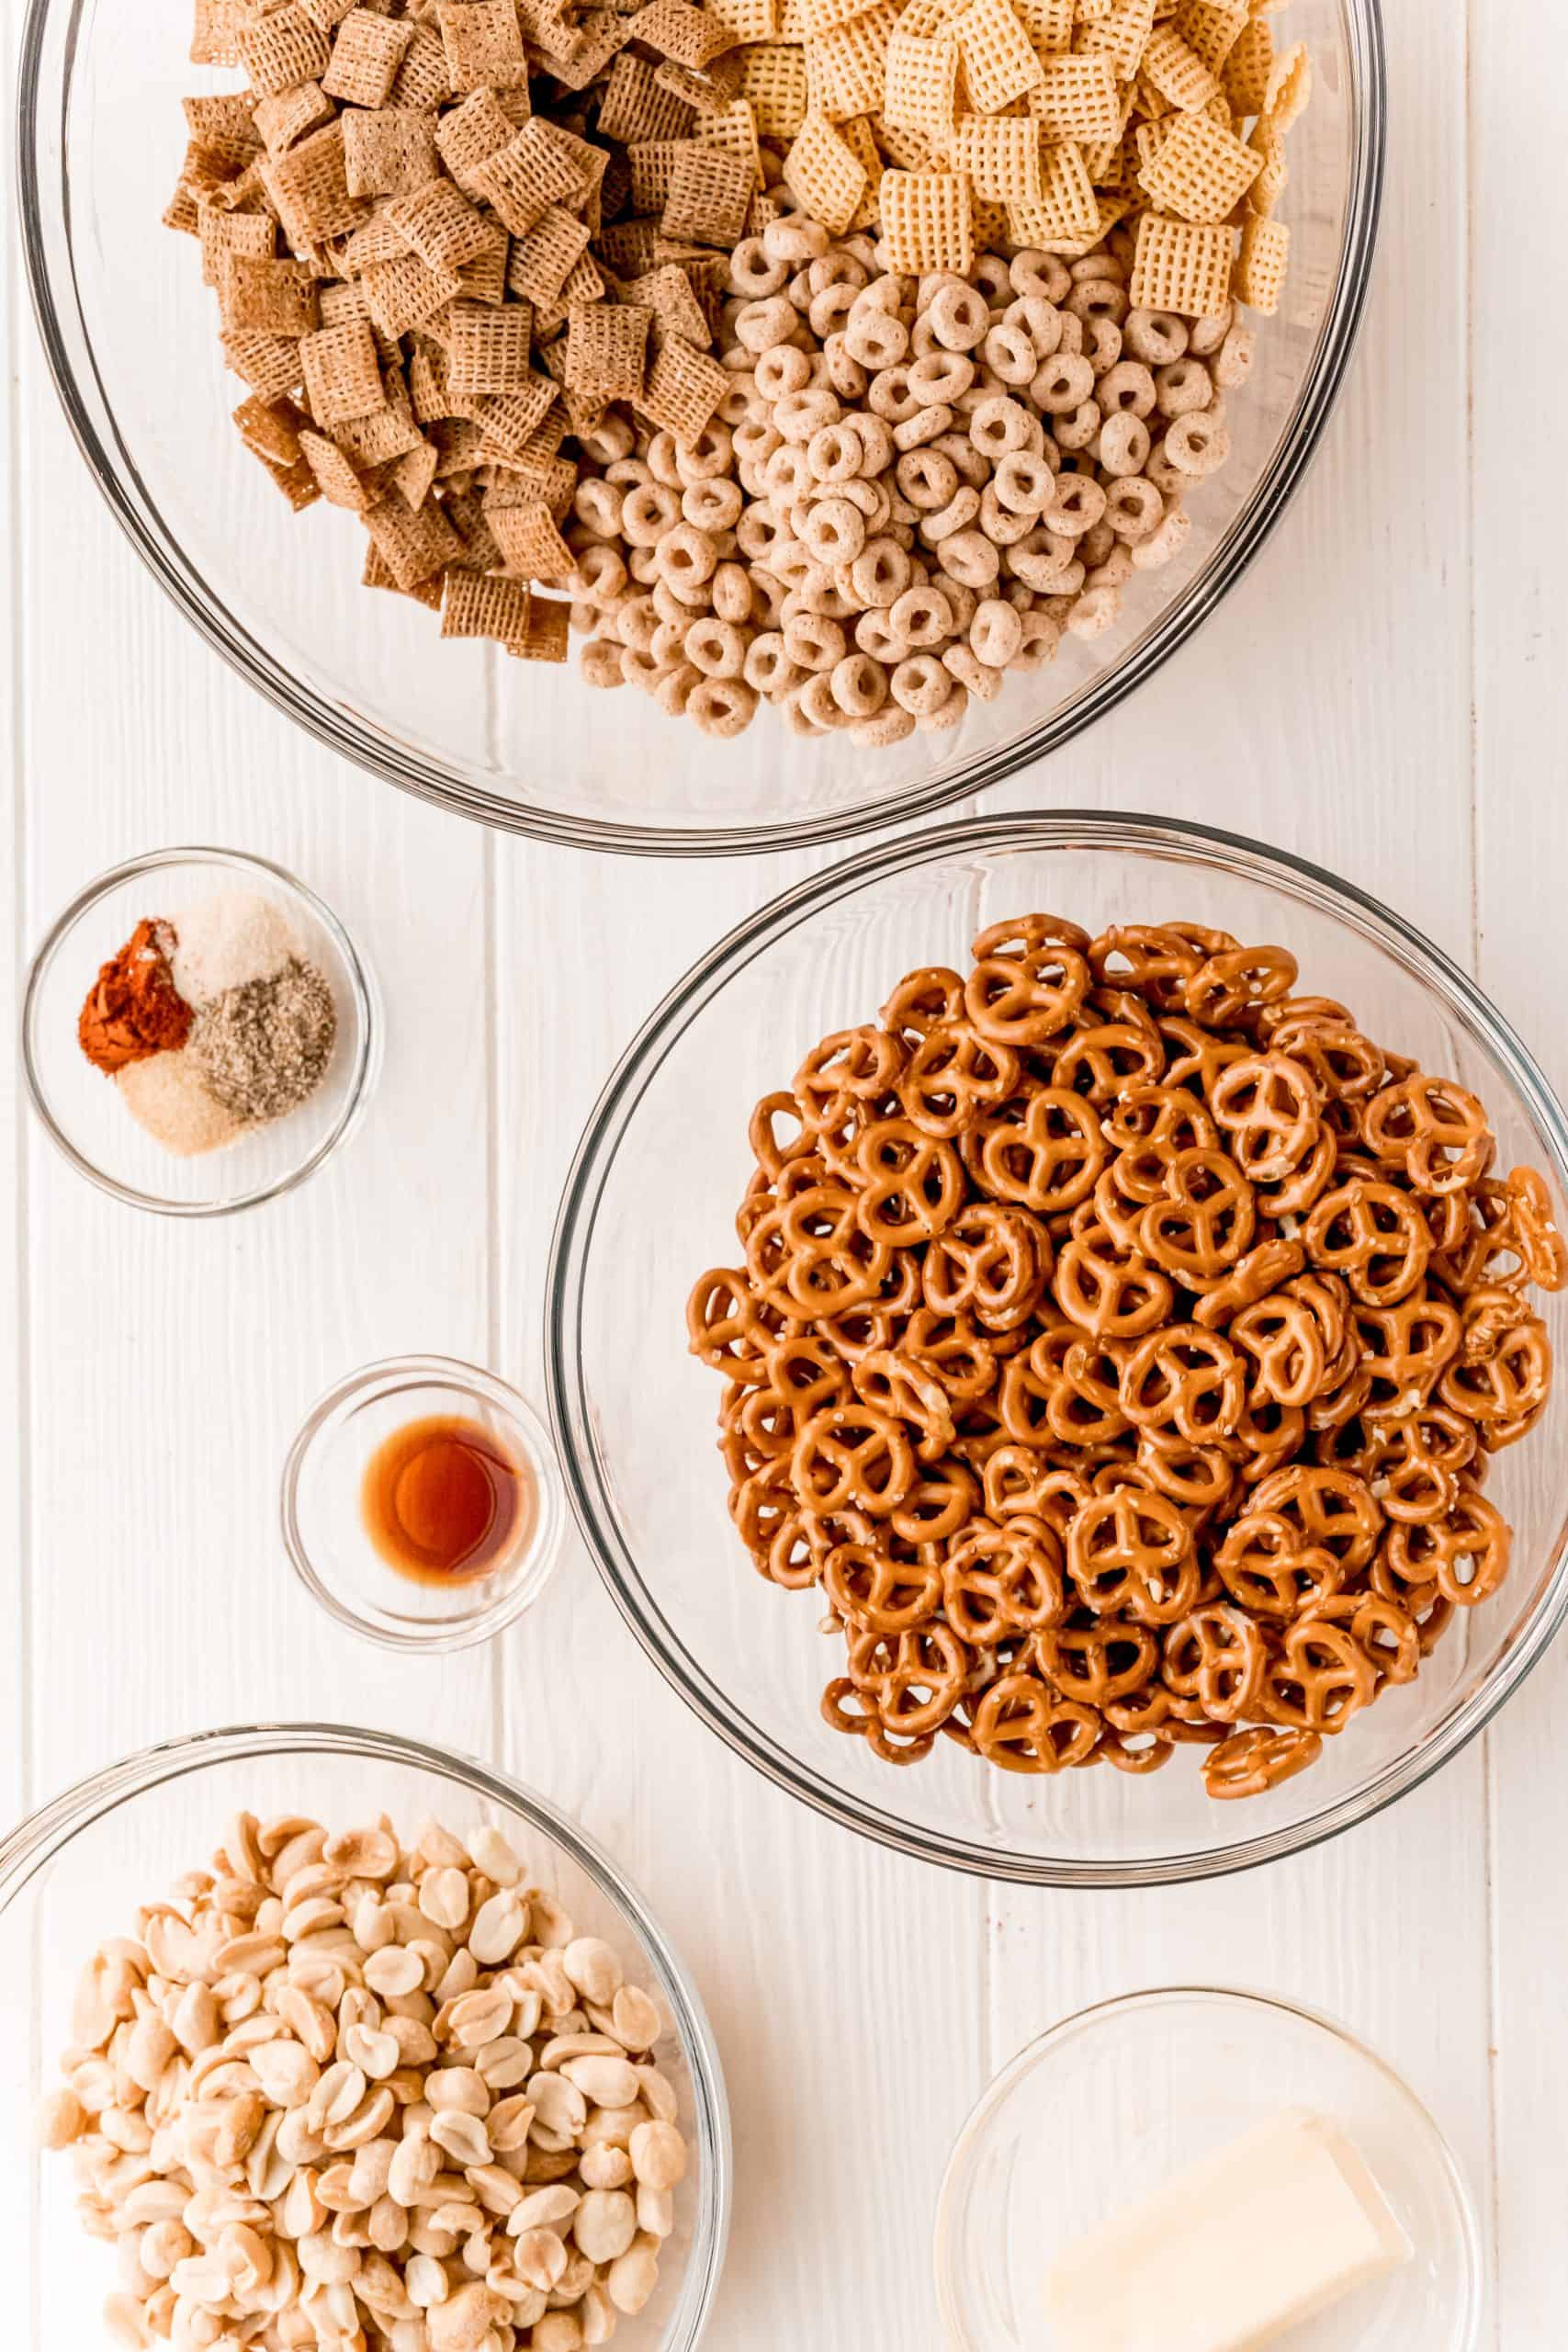 Ingredients need to make The Best Party Chex Mix